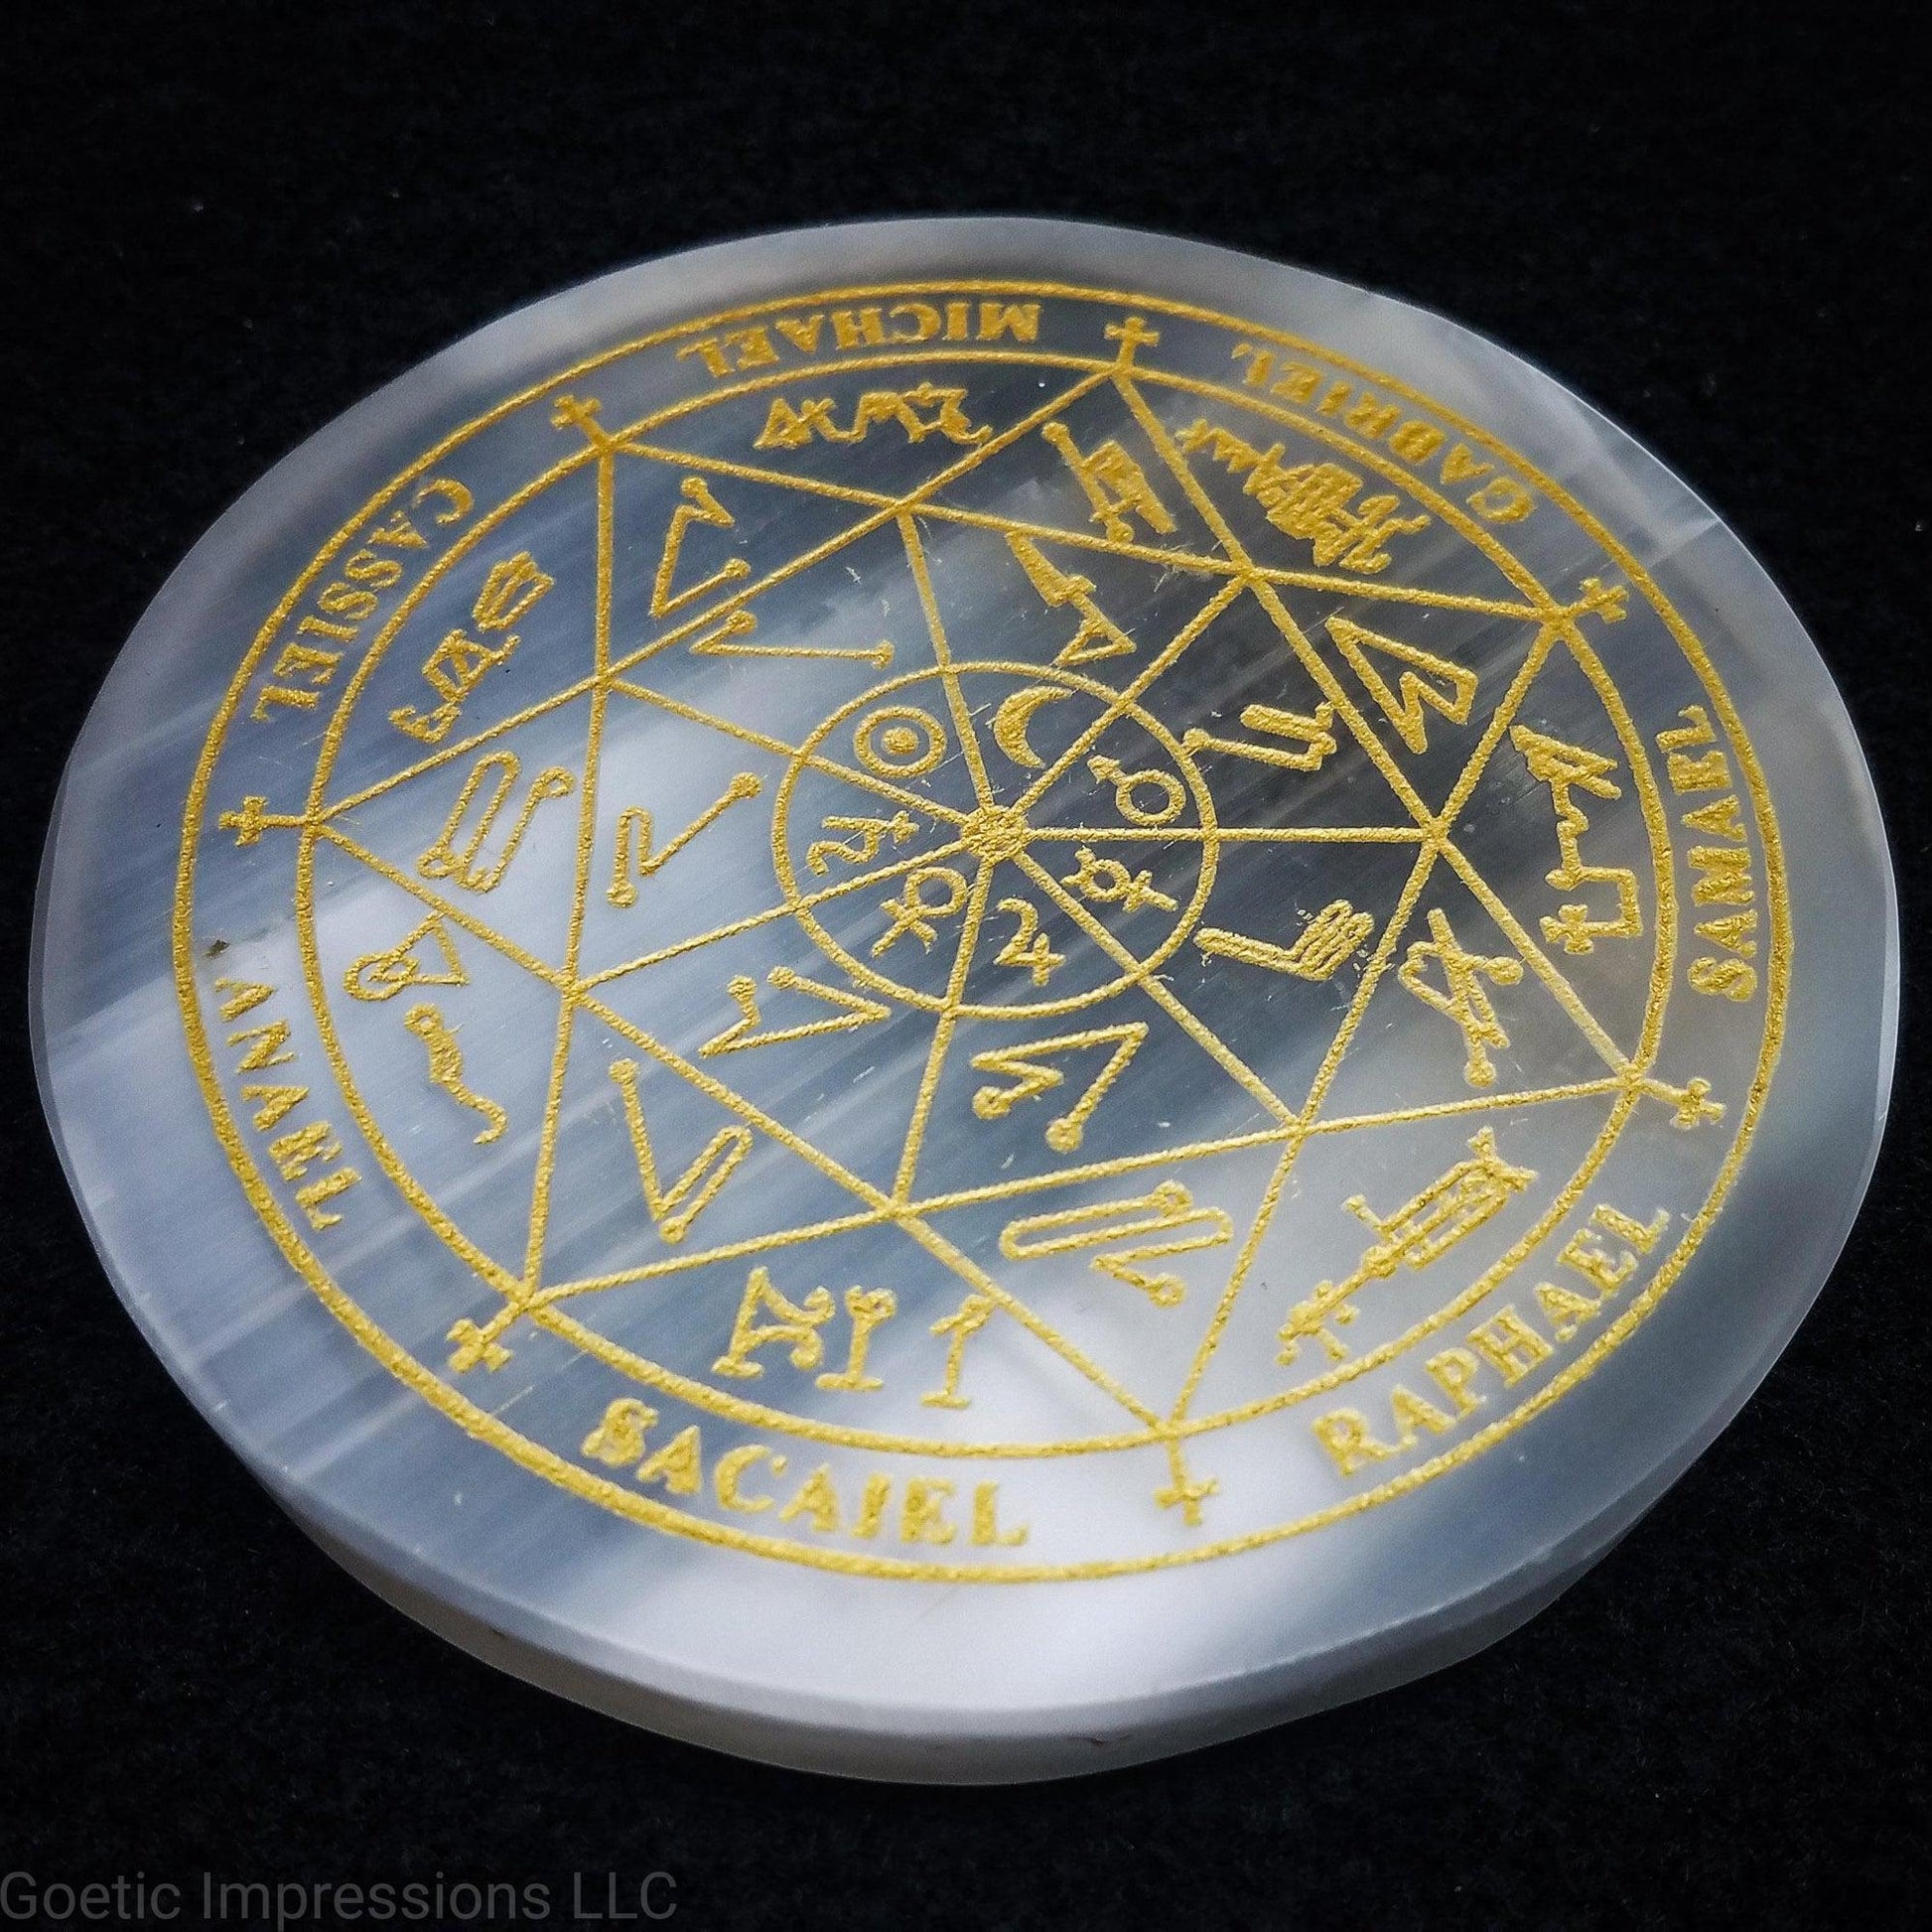 7 Planetary Archangel Seal Selenite Charging plate inlaid in gold.